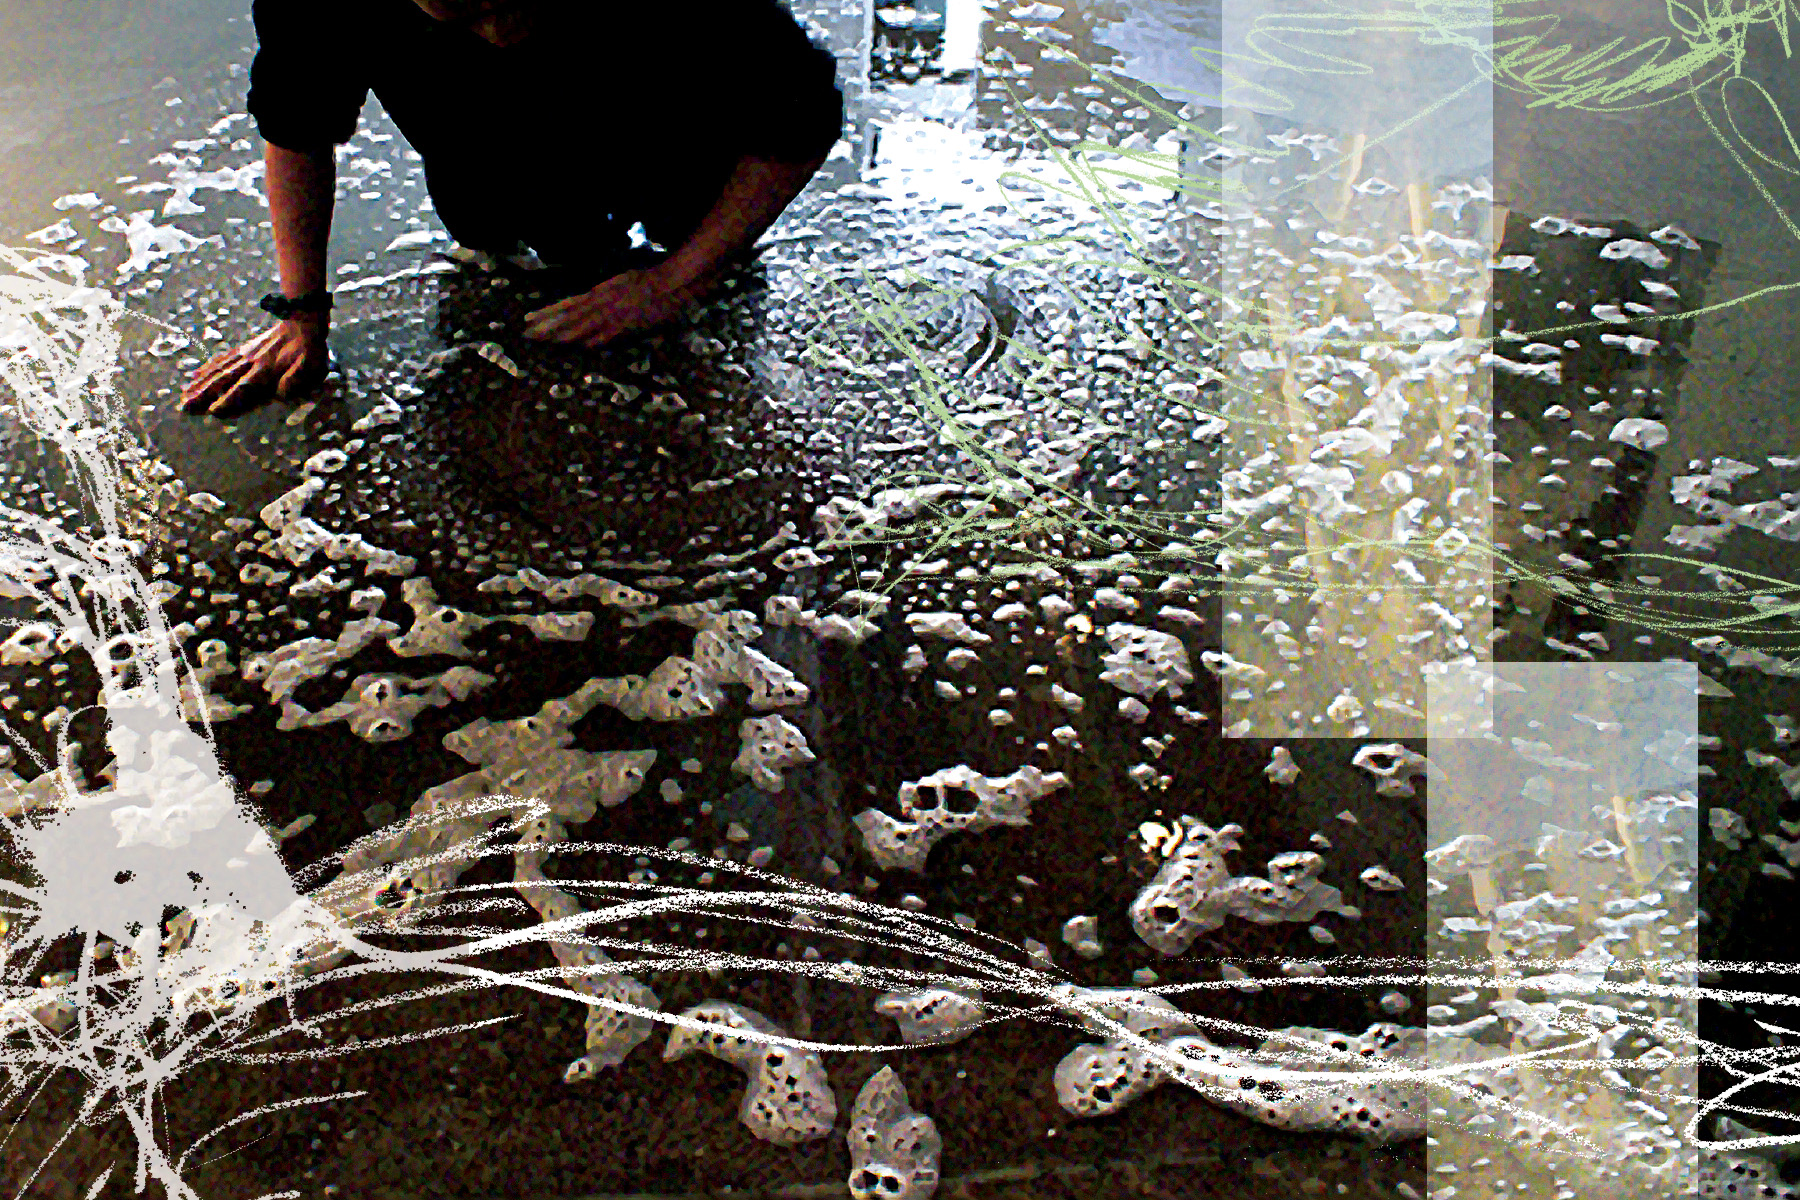 Drawing on water #4 (2022) by Pam Patterson, digital collage using drawing and performance documentation.